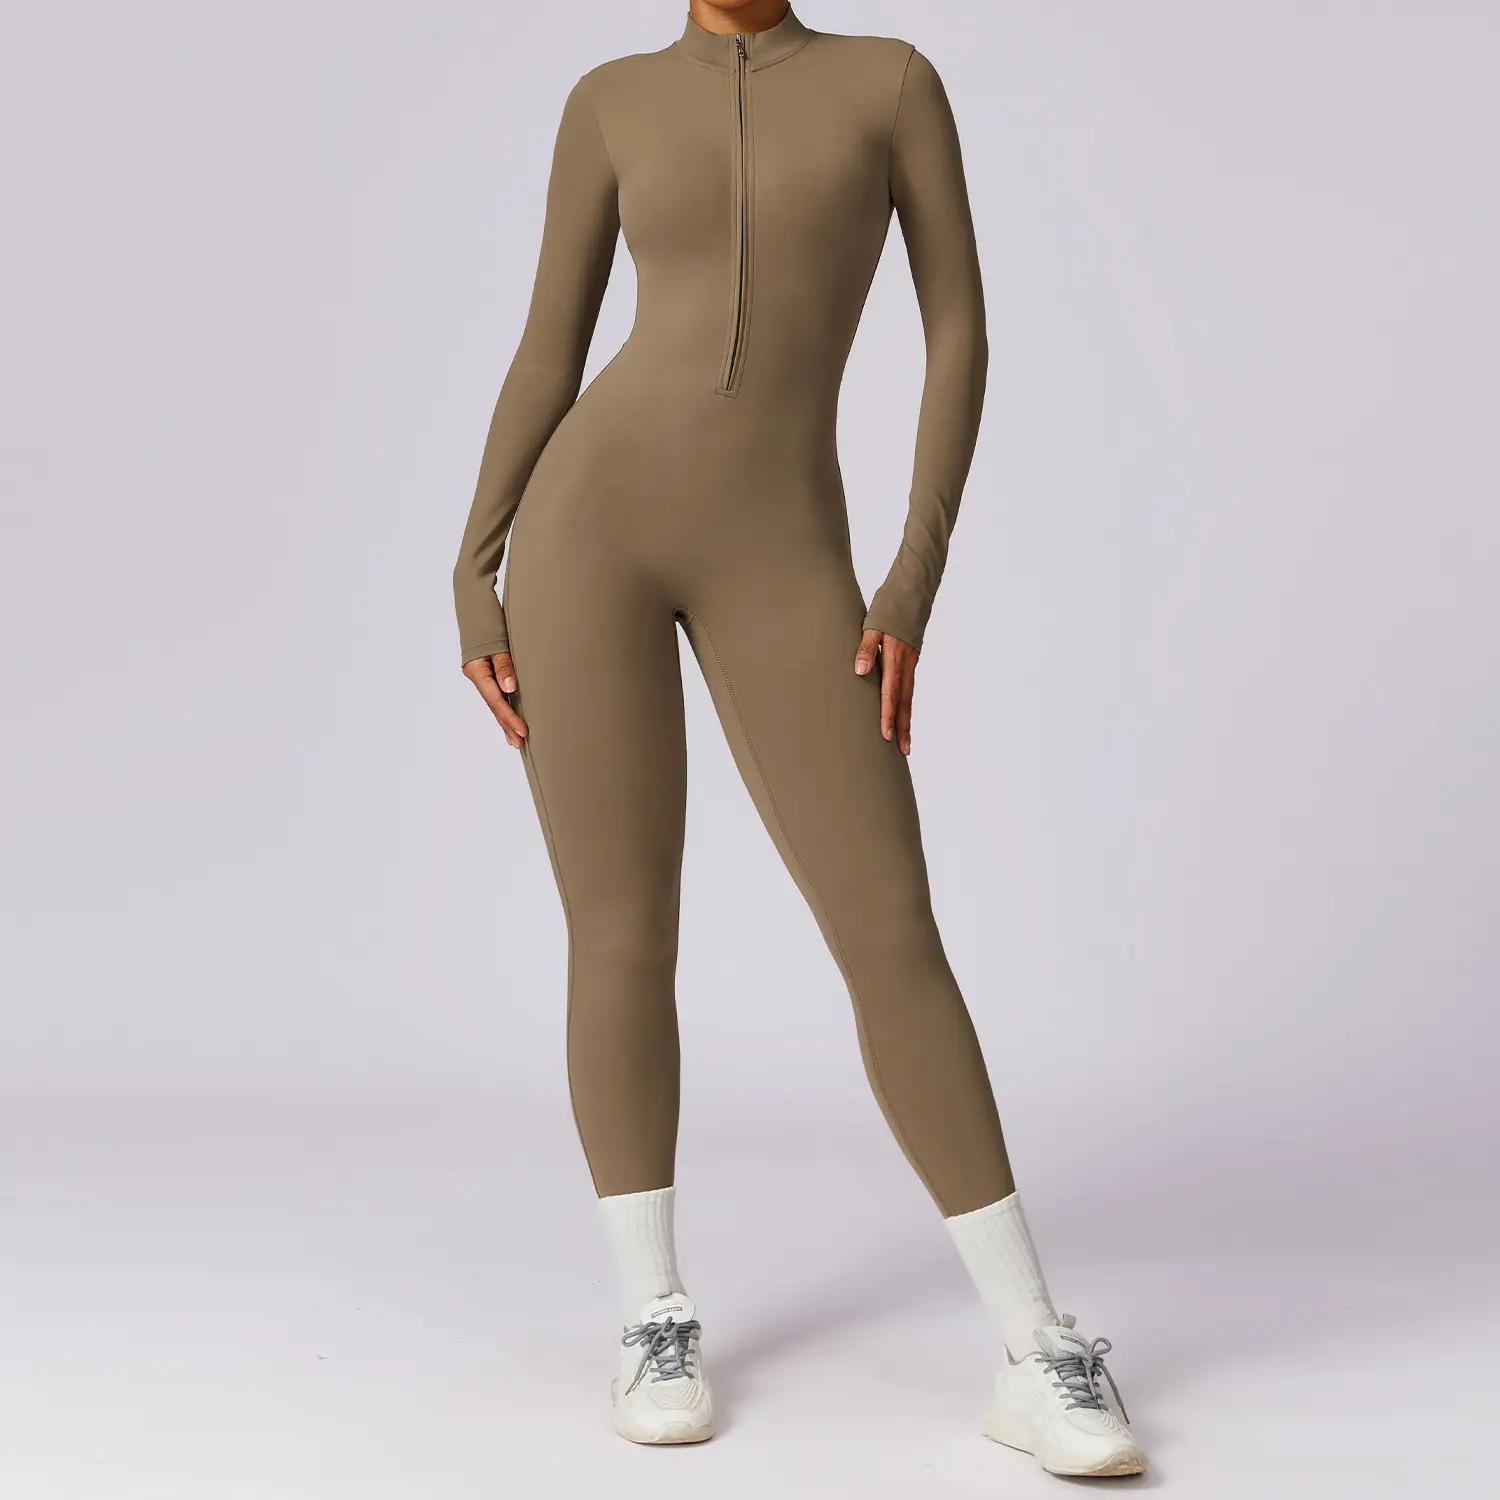 Wholesale Custom Logo Quick Dry Breathable Half Zip long Sleeve one piece Jumpsuit Workout Rompers Jumpsuits Playsuits Bodysuits